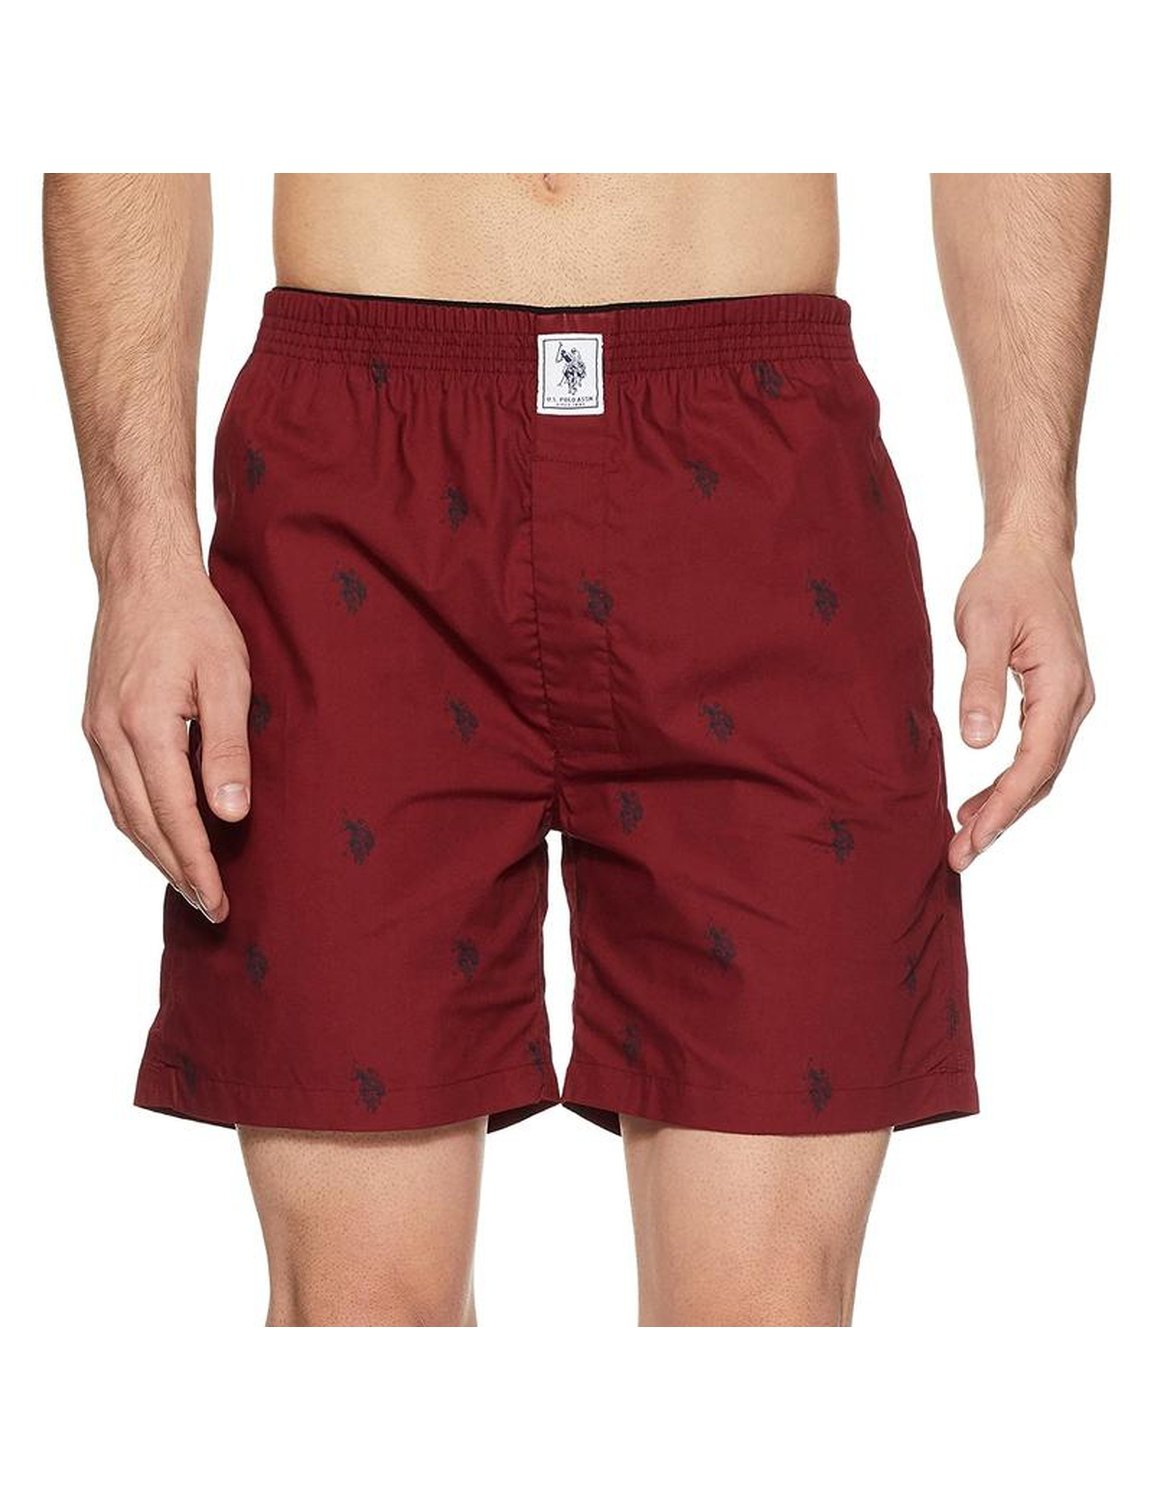 US Polo Men's Maroon Cotton Printed Boxers Shorts with Pockets - Stilento